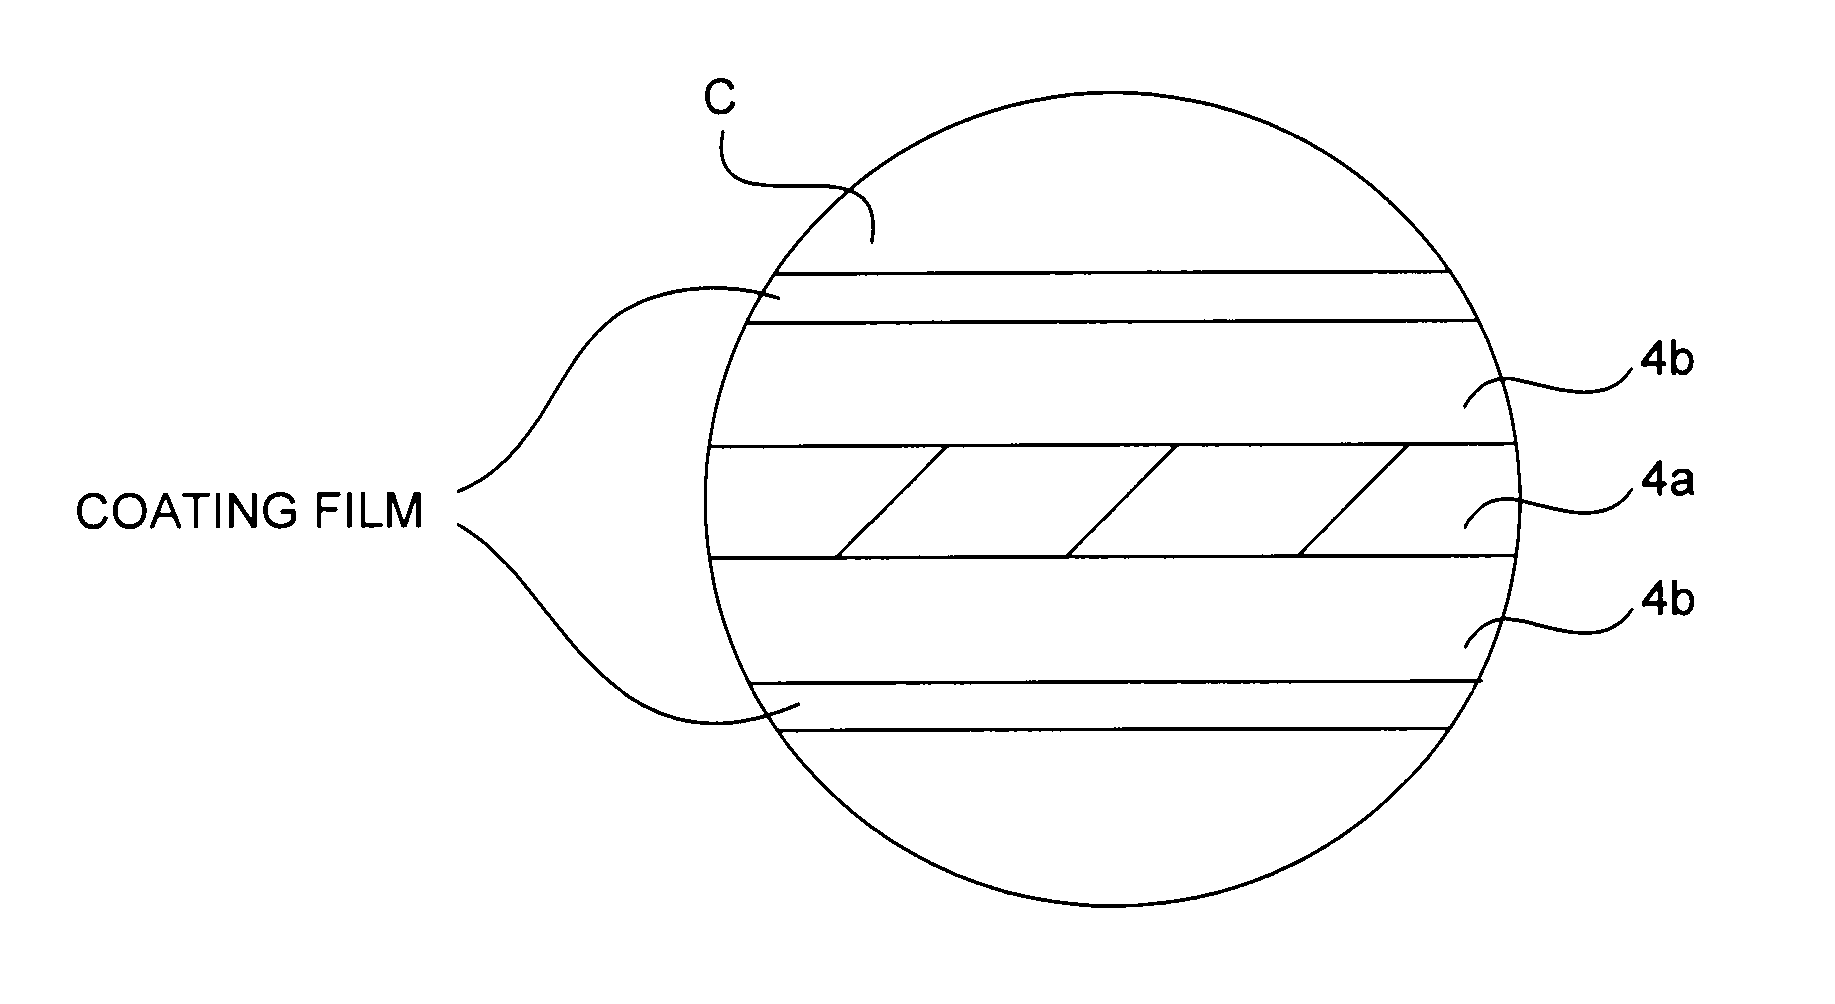 Nonaqueous-electrolyte battery containing a negative electrode with a coating film formed by an isocyanate-containing compound in the nonaqueous electrolyte